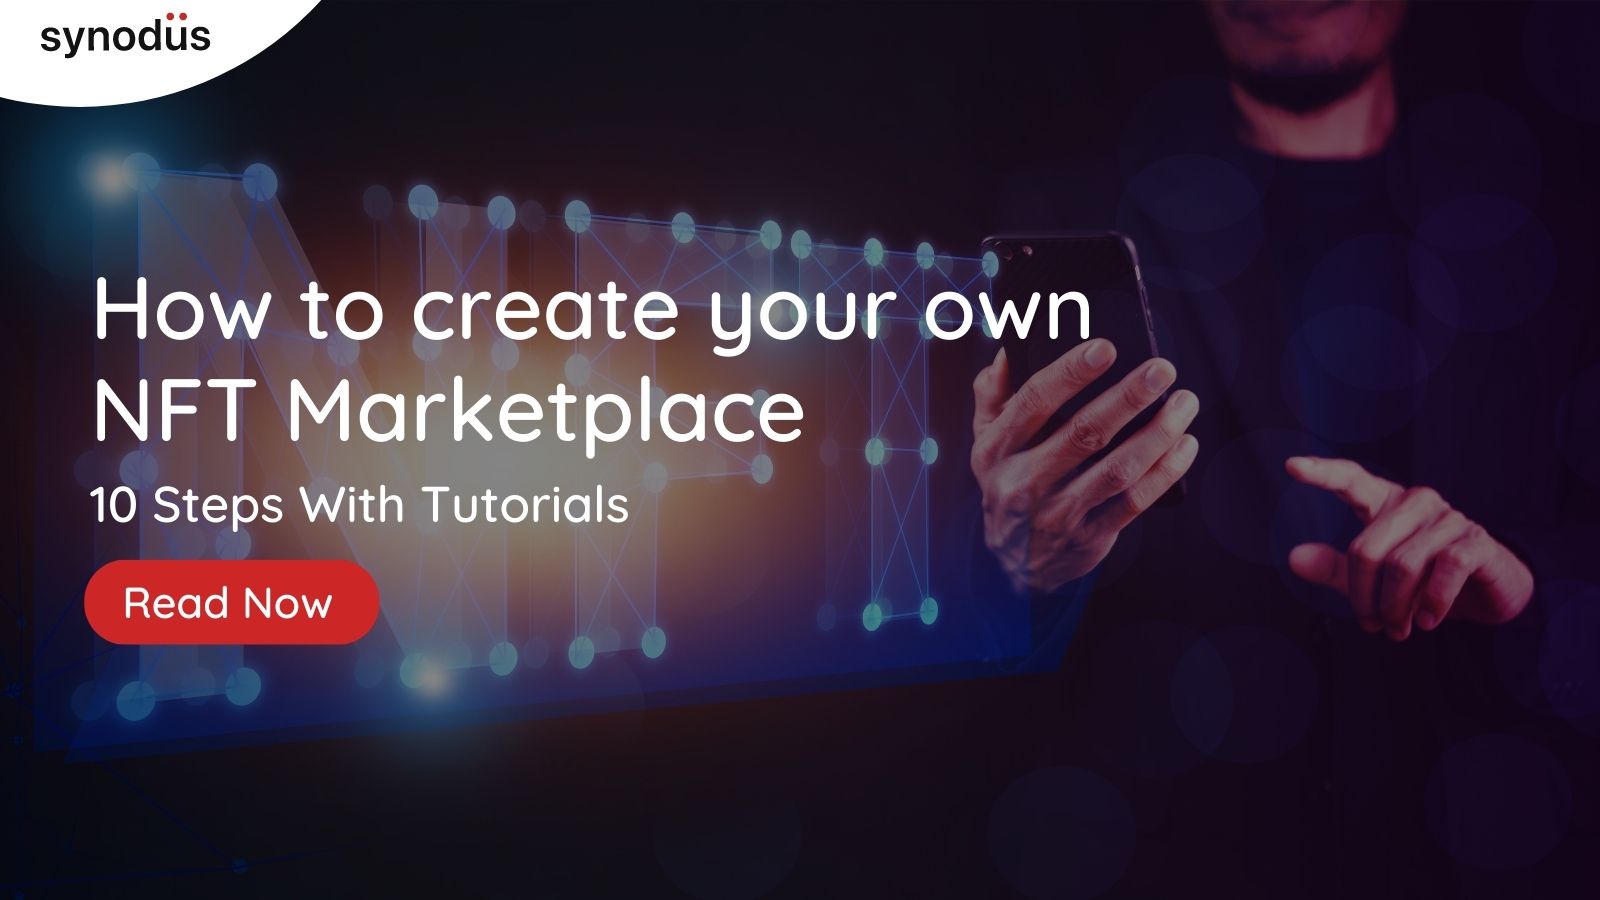 How to create your own NFT Marketplace - 10 steps with tutorials